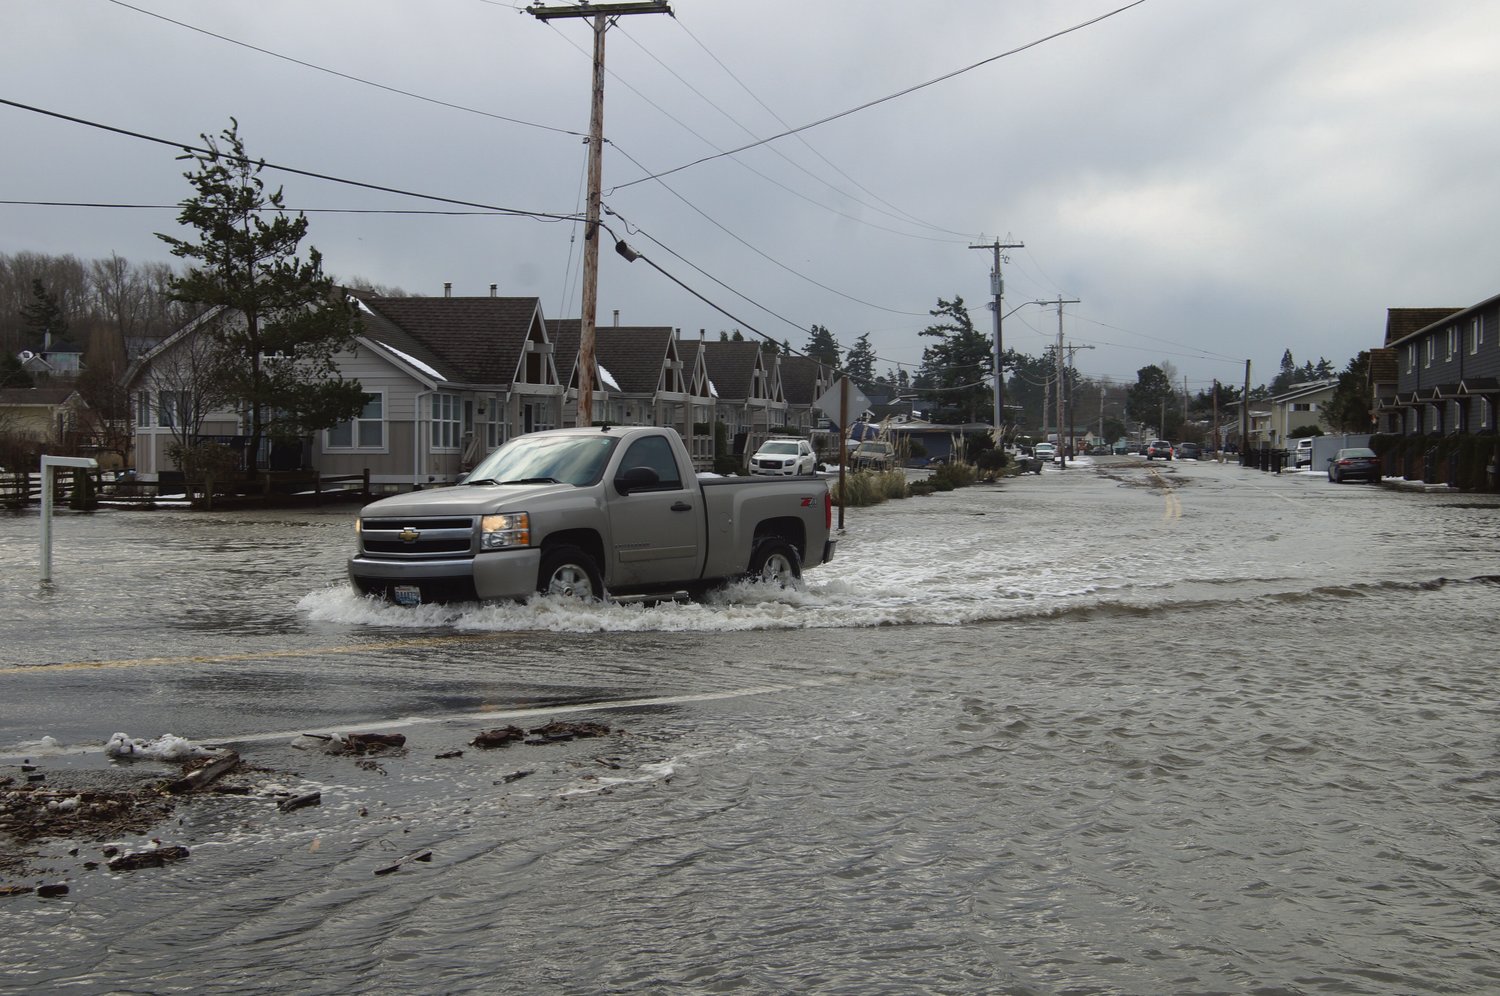 King tide, storm pressure and waves up to 4 feet tall flood south Birch Bay Drive on January 7.